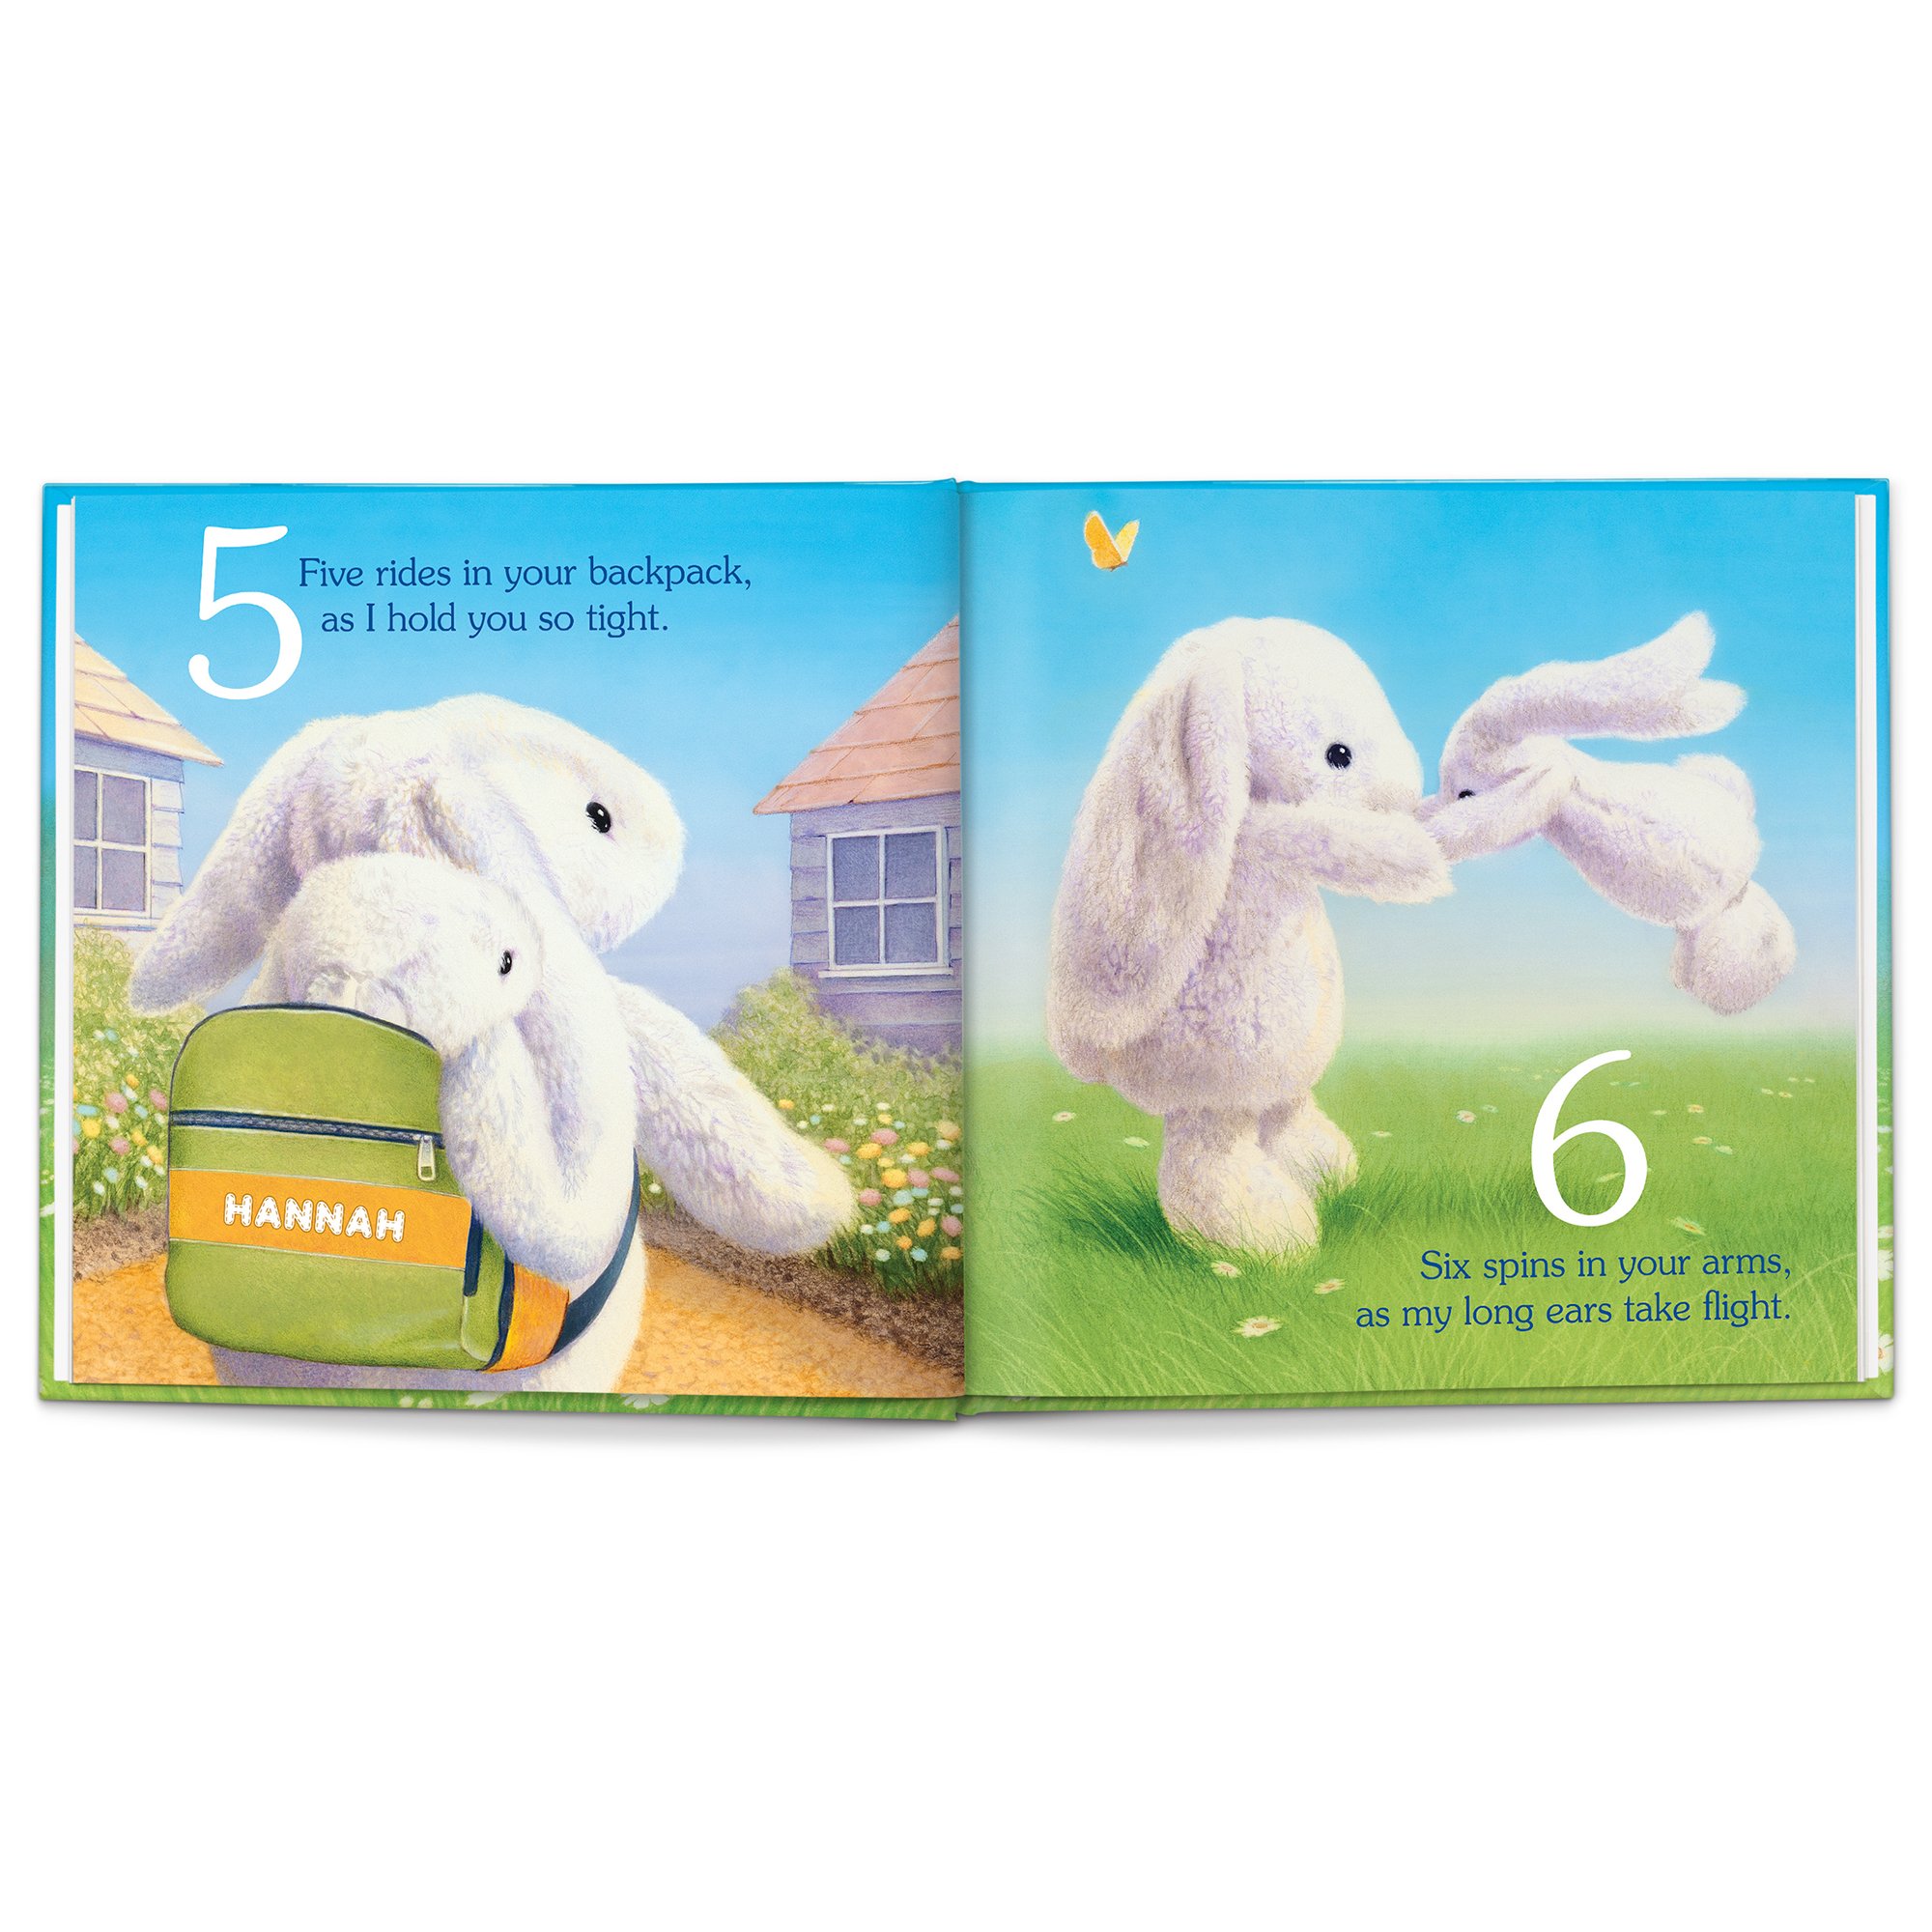 My Snuggle Bunny! Personalised Storybook